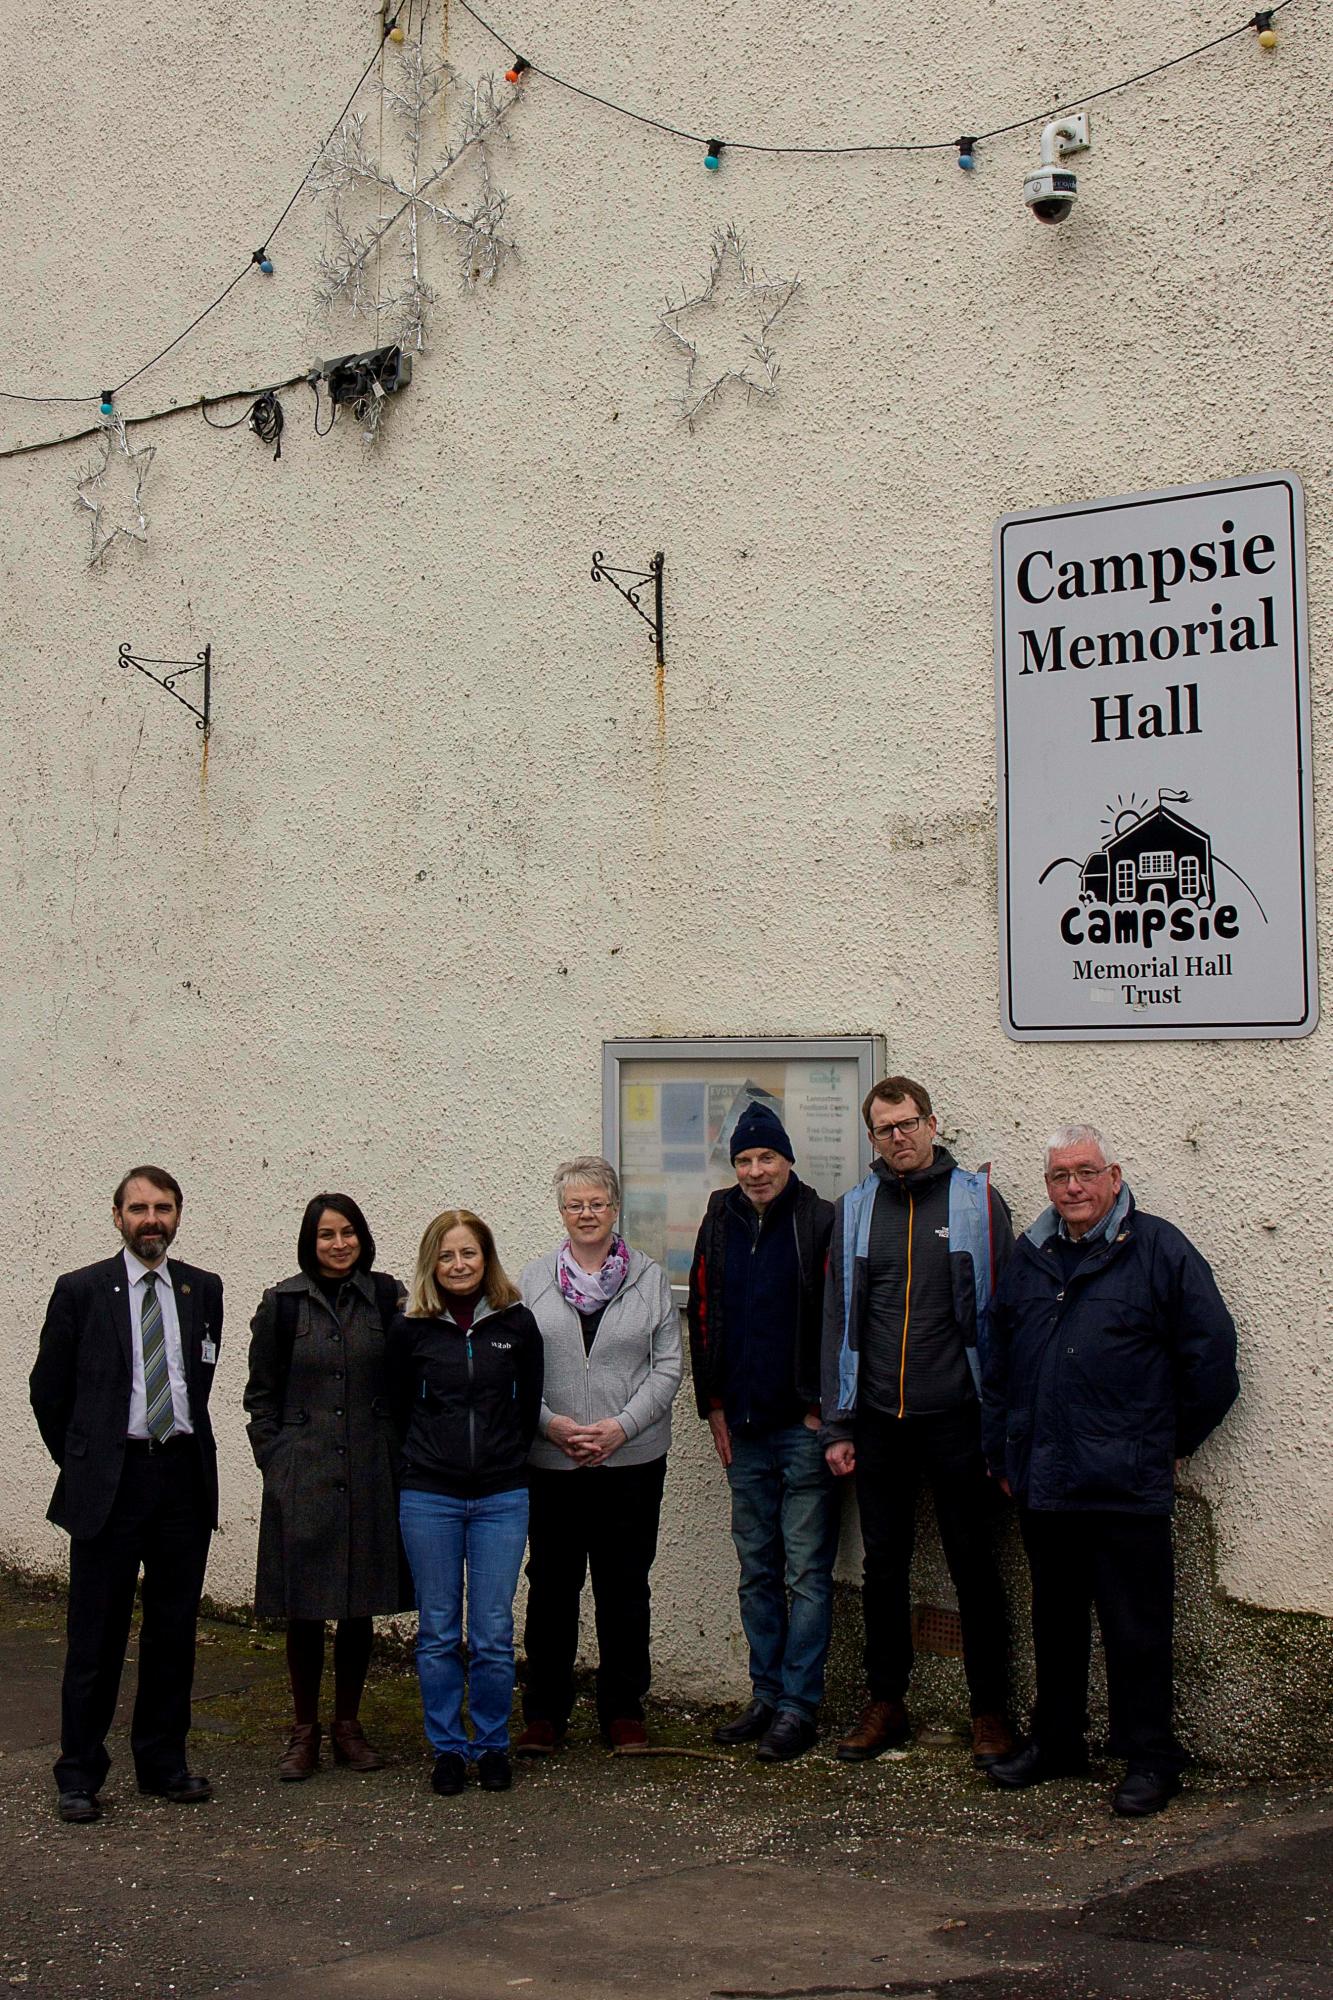 Council Leader Gordan Low with Catherine Drummond and Council Officers outside Campsie Memorial Hall